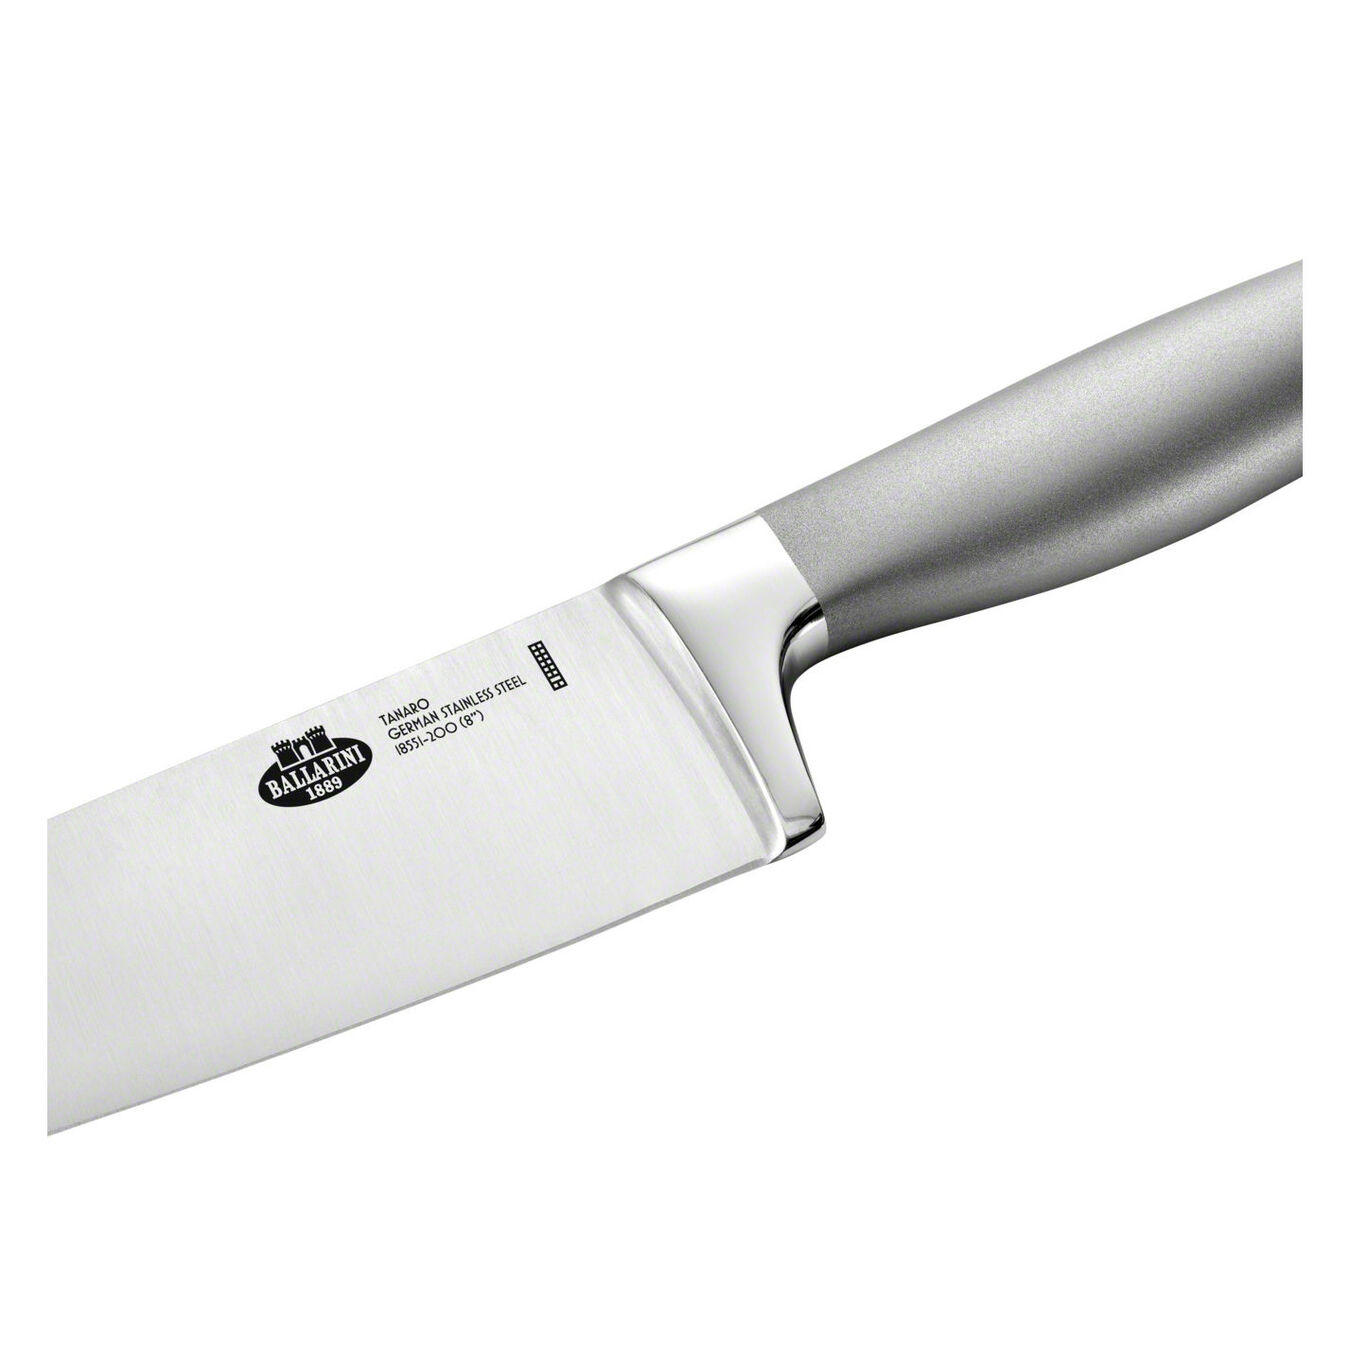 6.5 inch Carving knife,,large 3